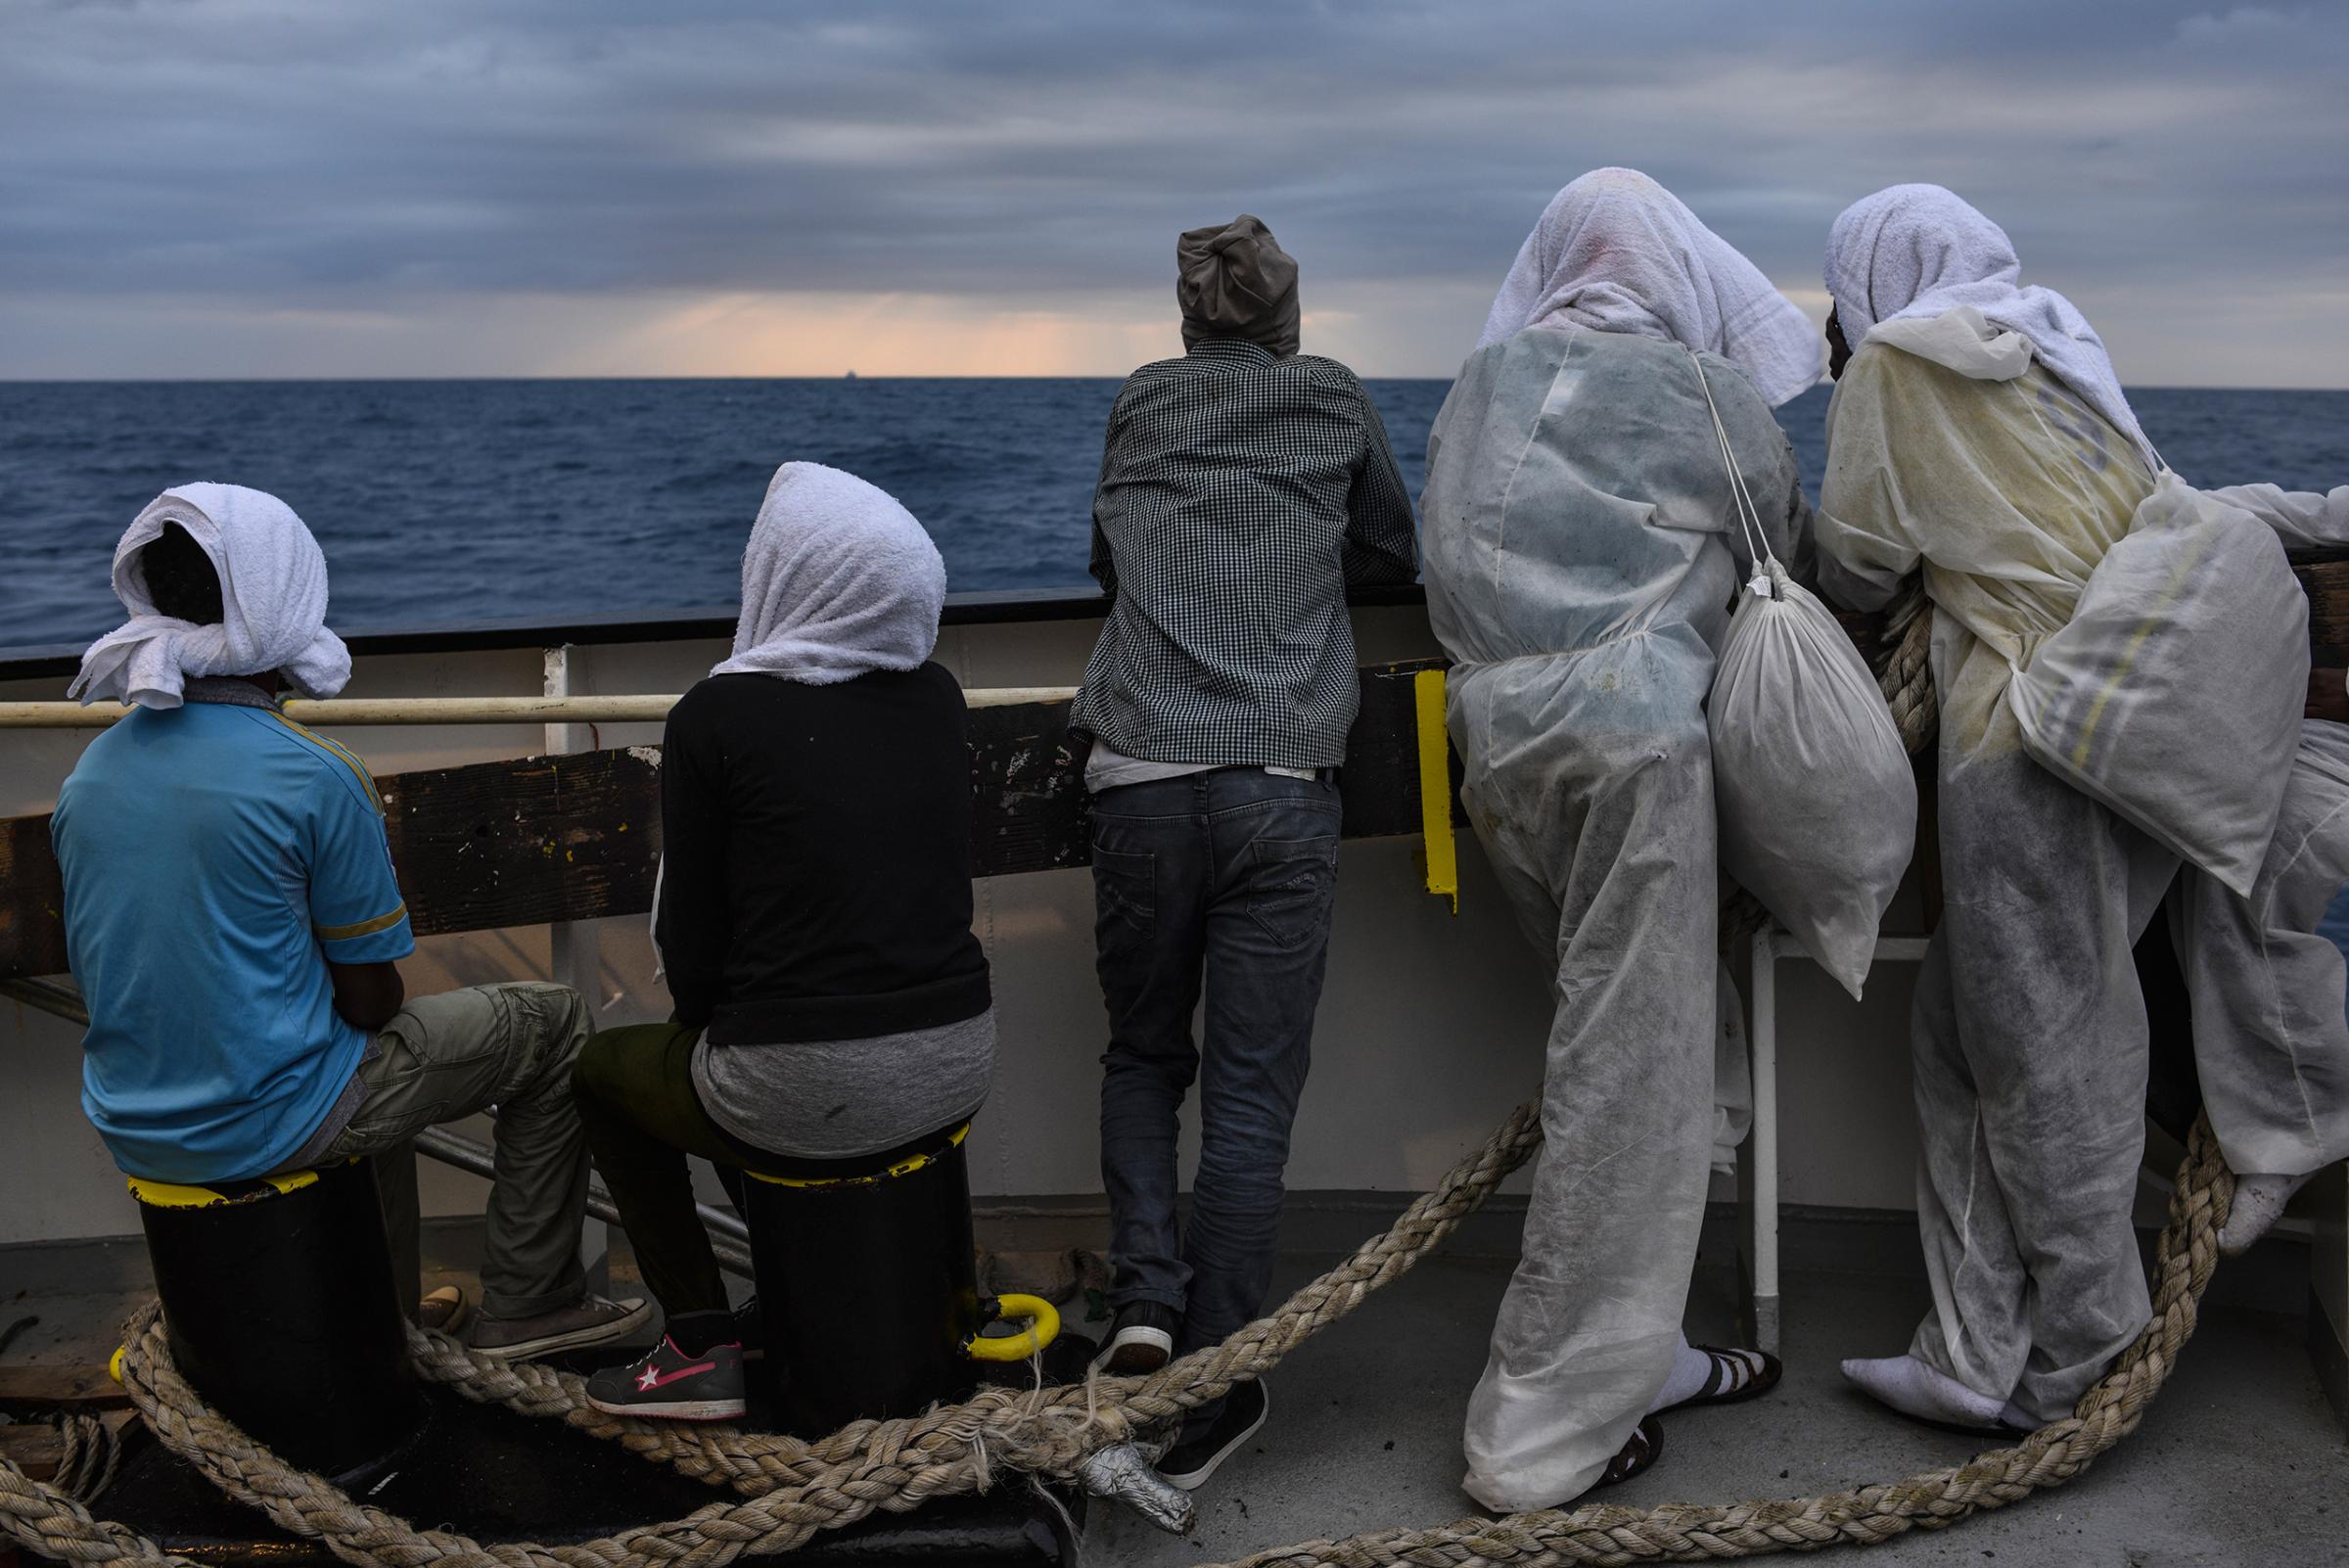 Migrants approaching the coast of Sicily, two days after they were rescued, Aug. 23, 2016.